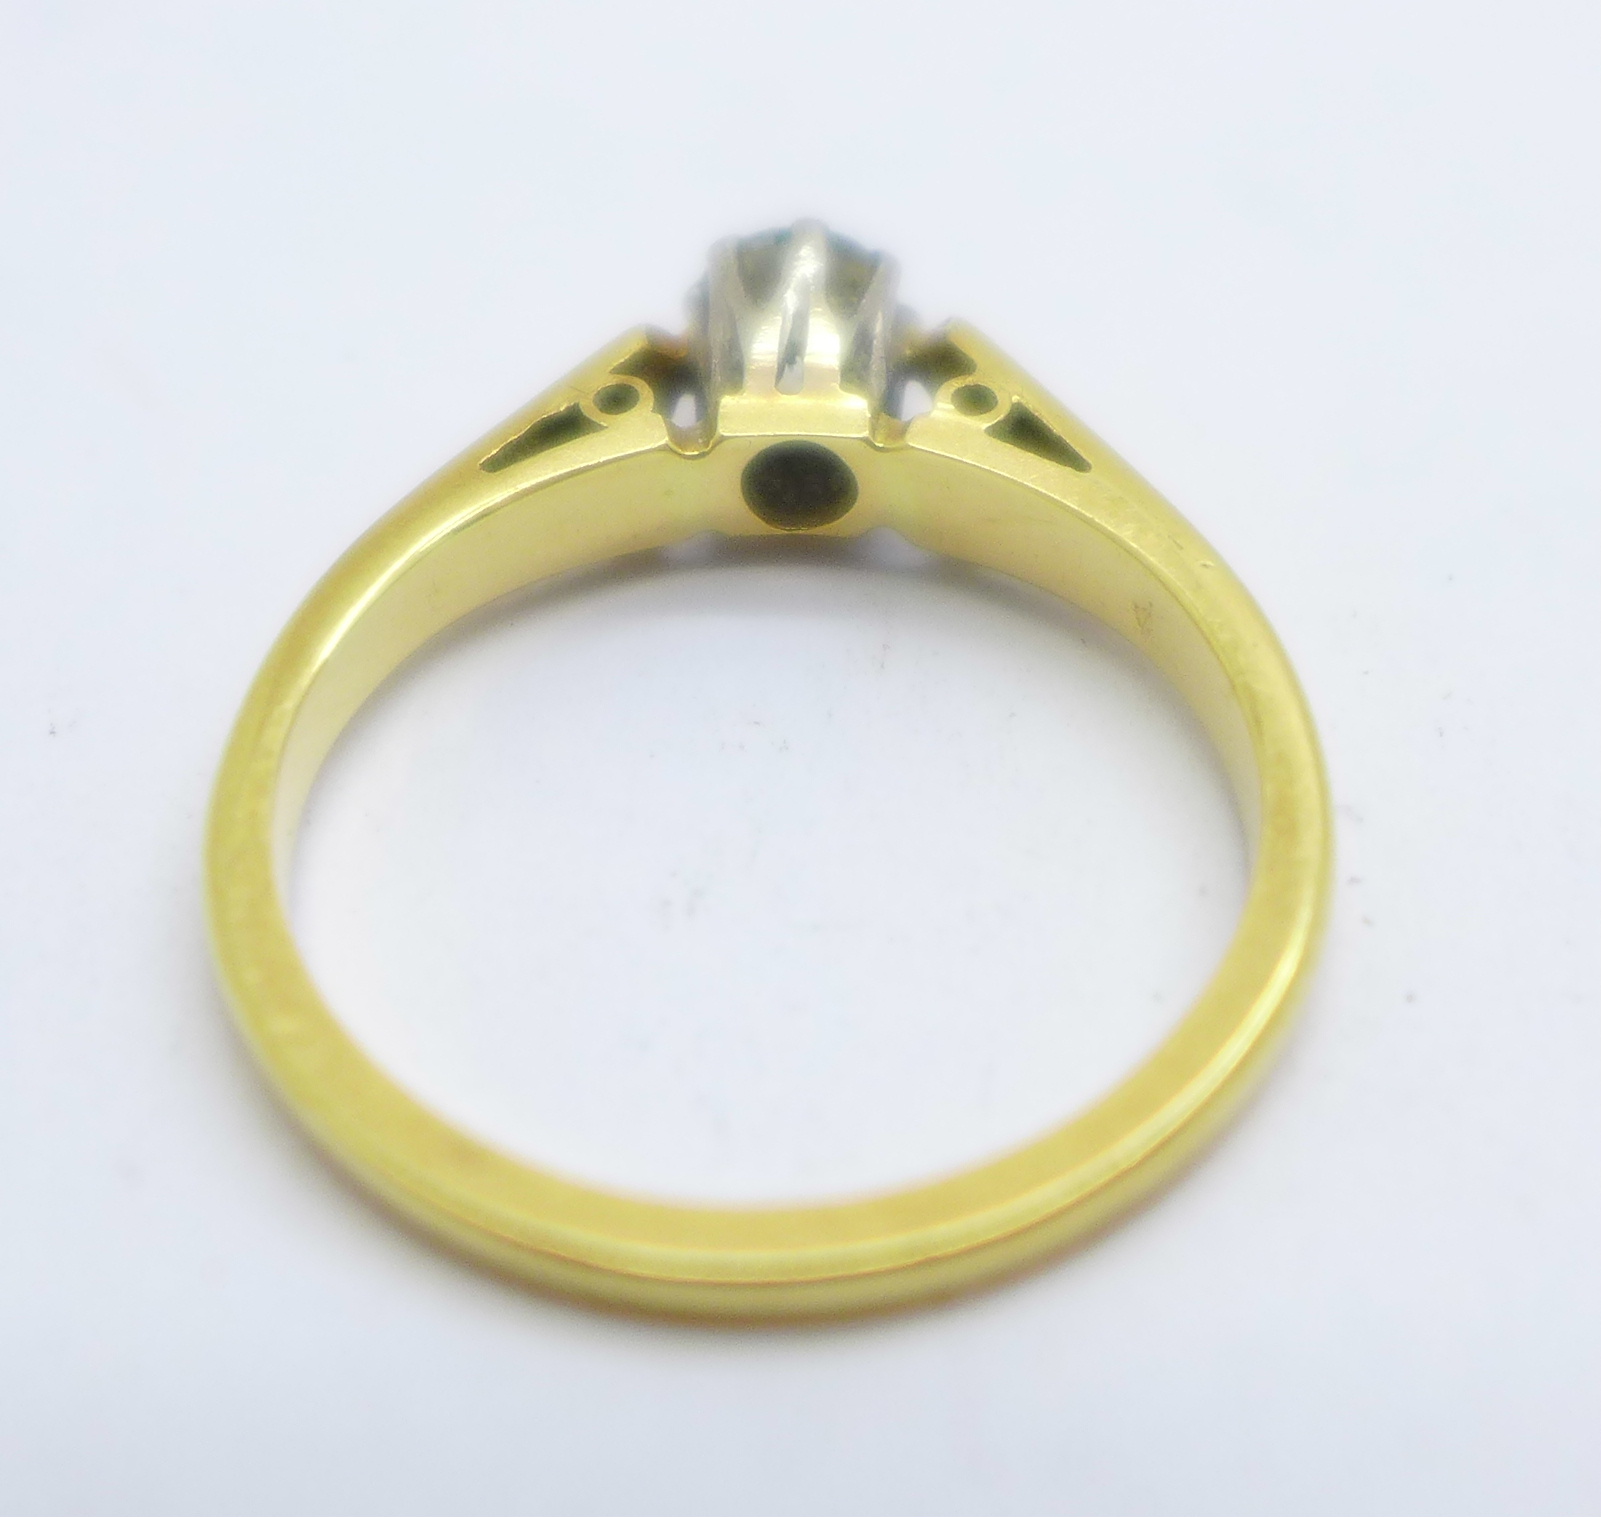 An 18ct gold and diamond solitaire ring, 2.7g, K, approximately 0.25carat weight - Image 3 of 3